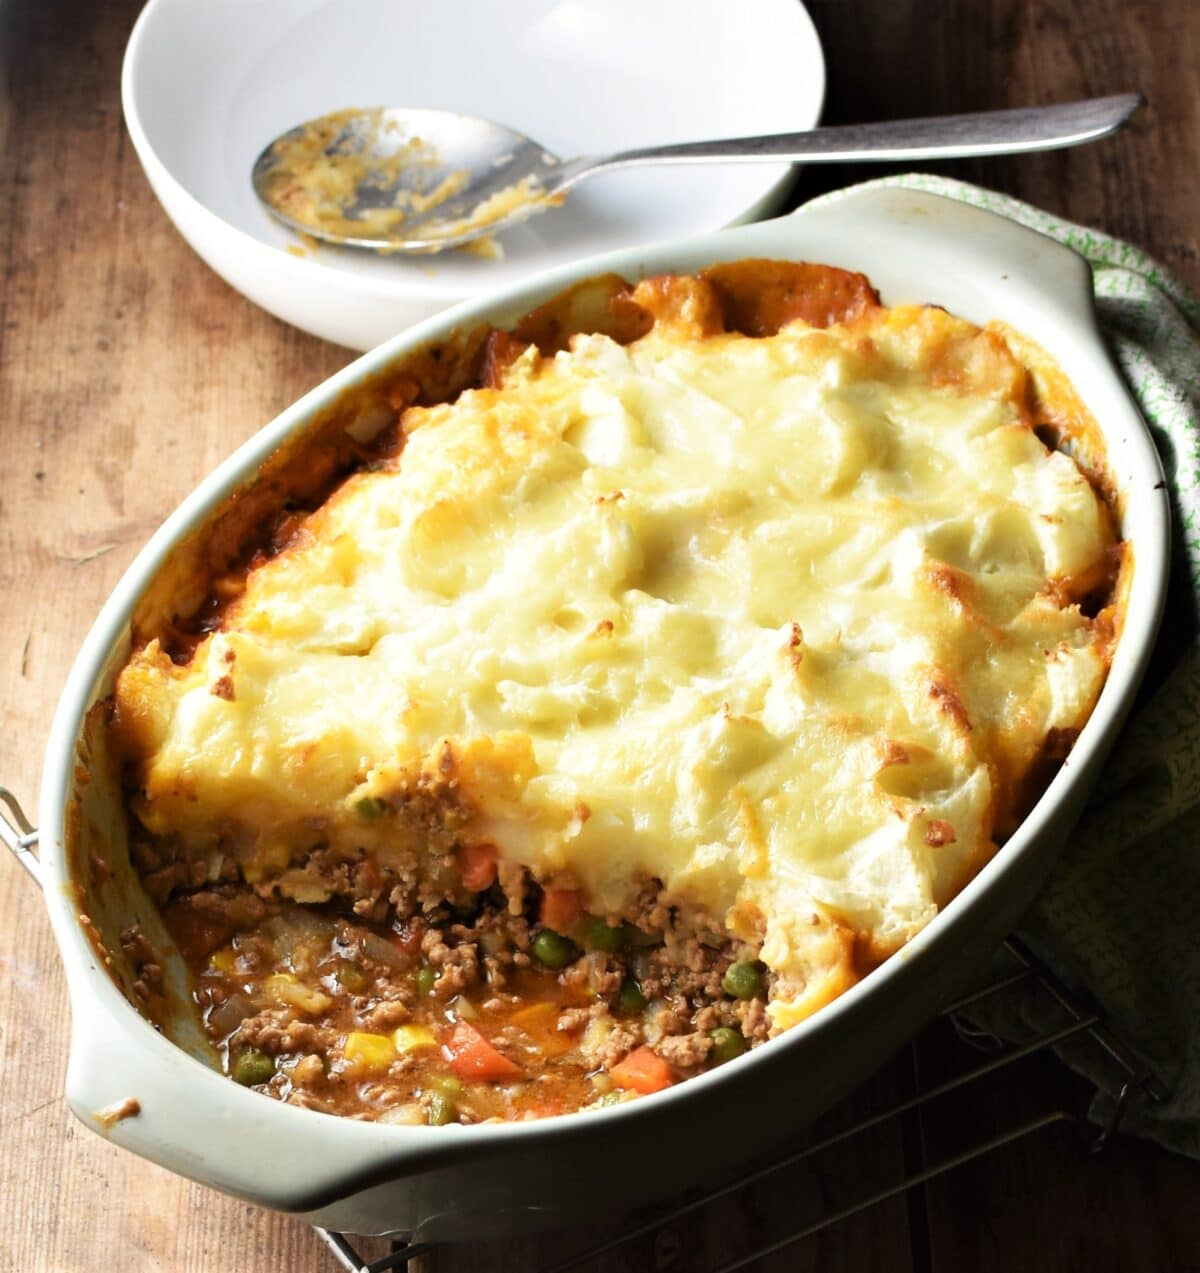 Side view of turkey cottage pie in oval green dish with white bowl and spoon in background.